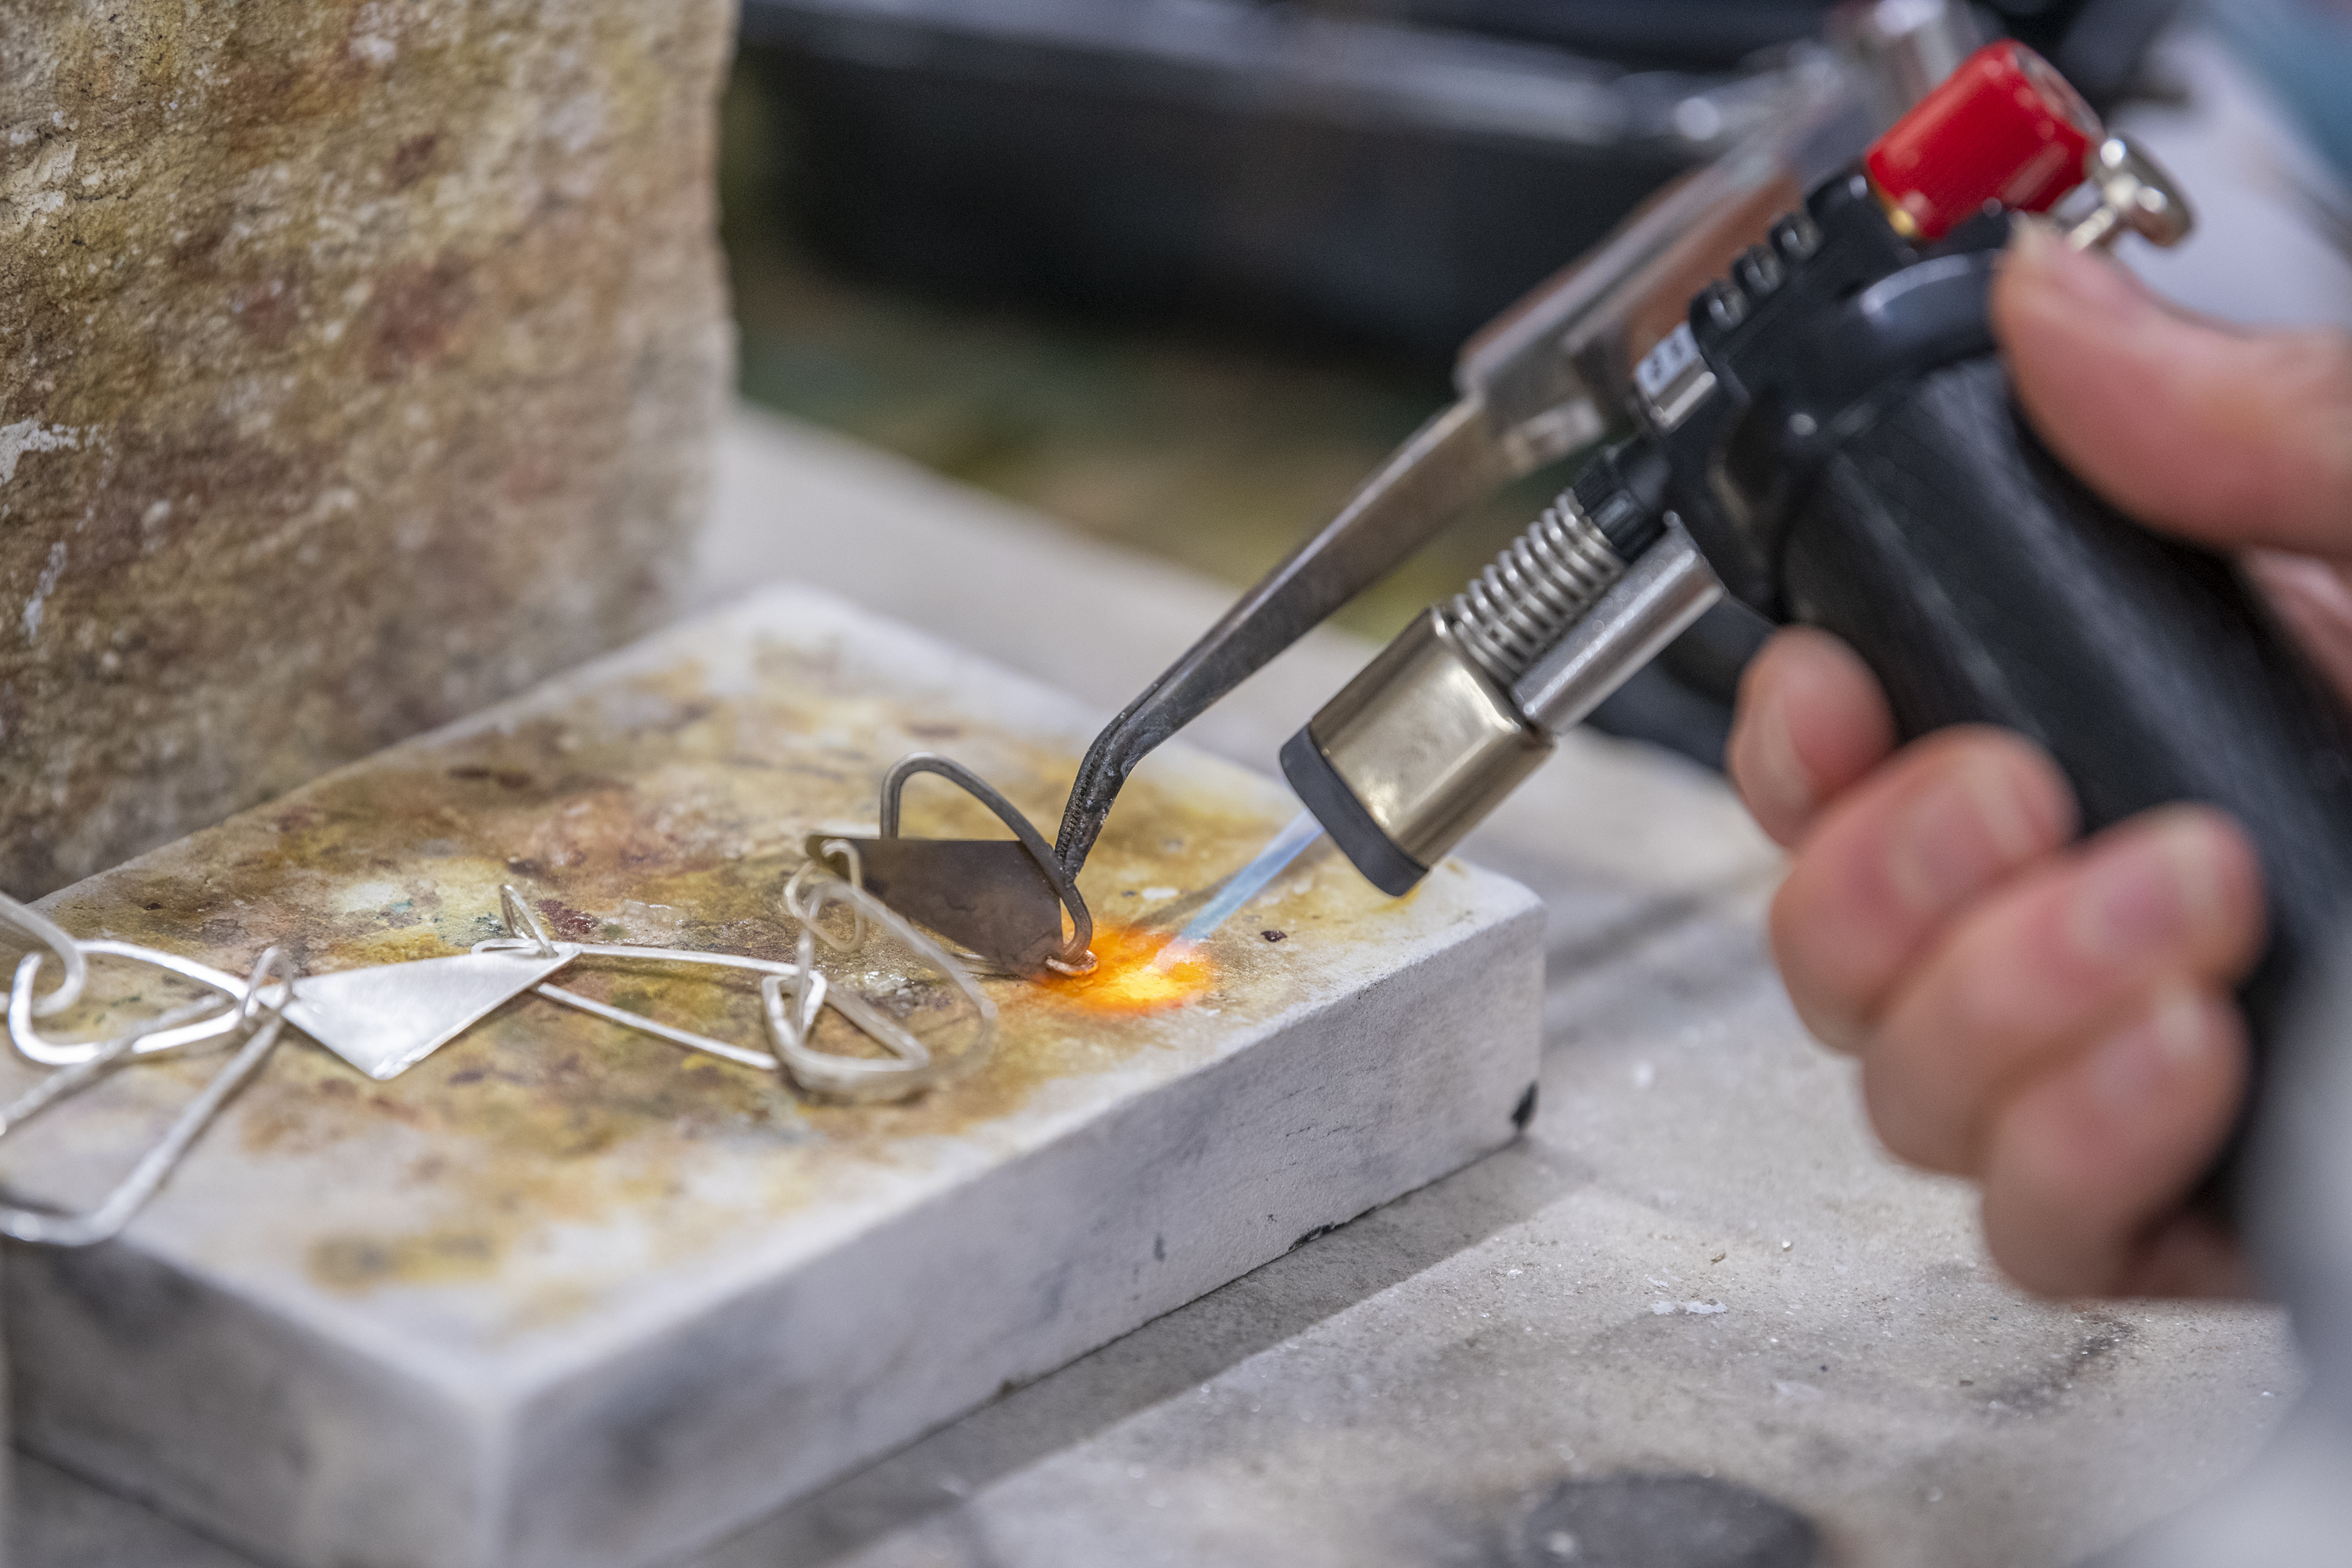 Learner creating jewellery with a fire gun